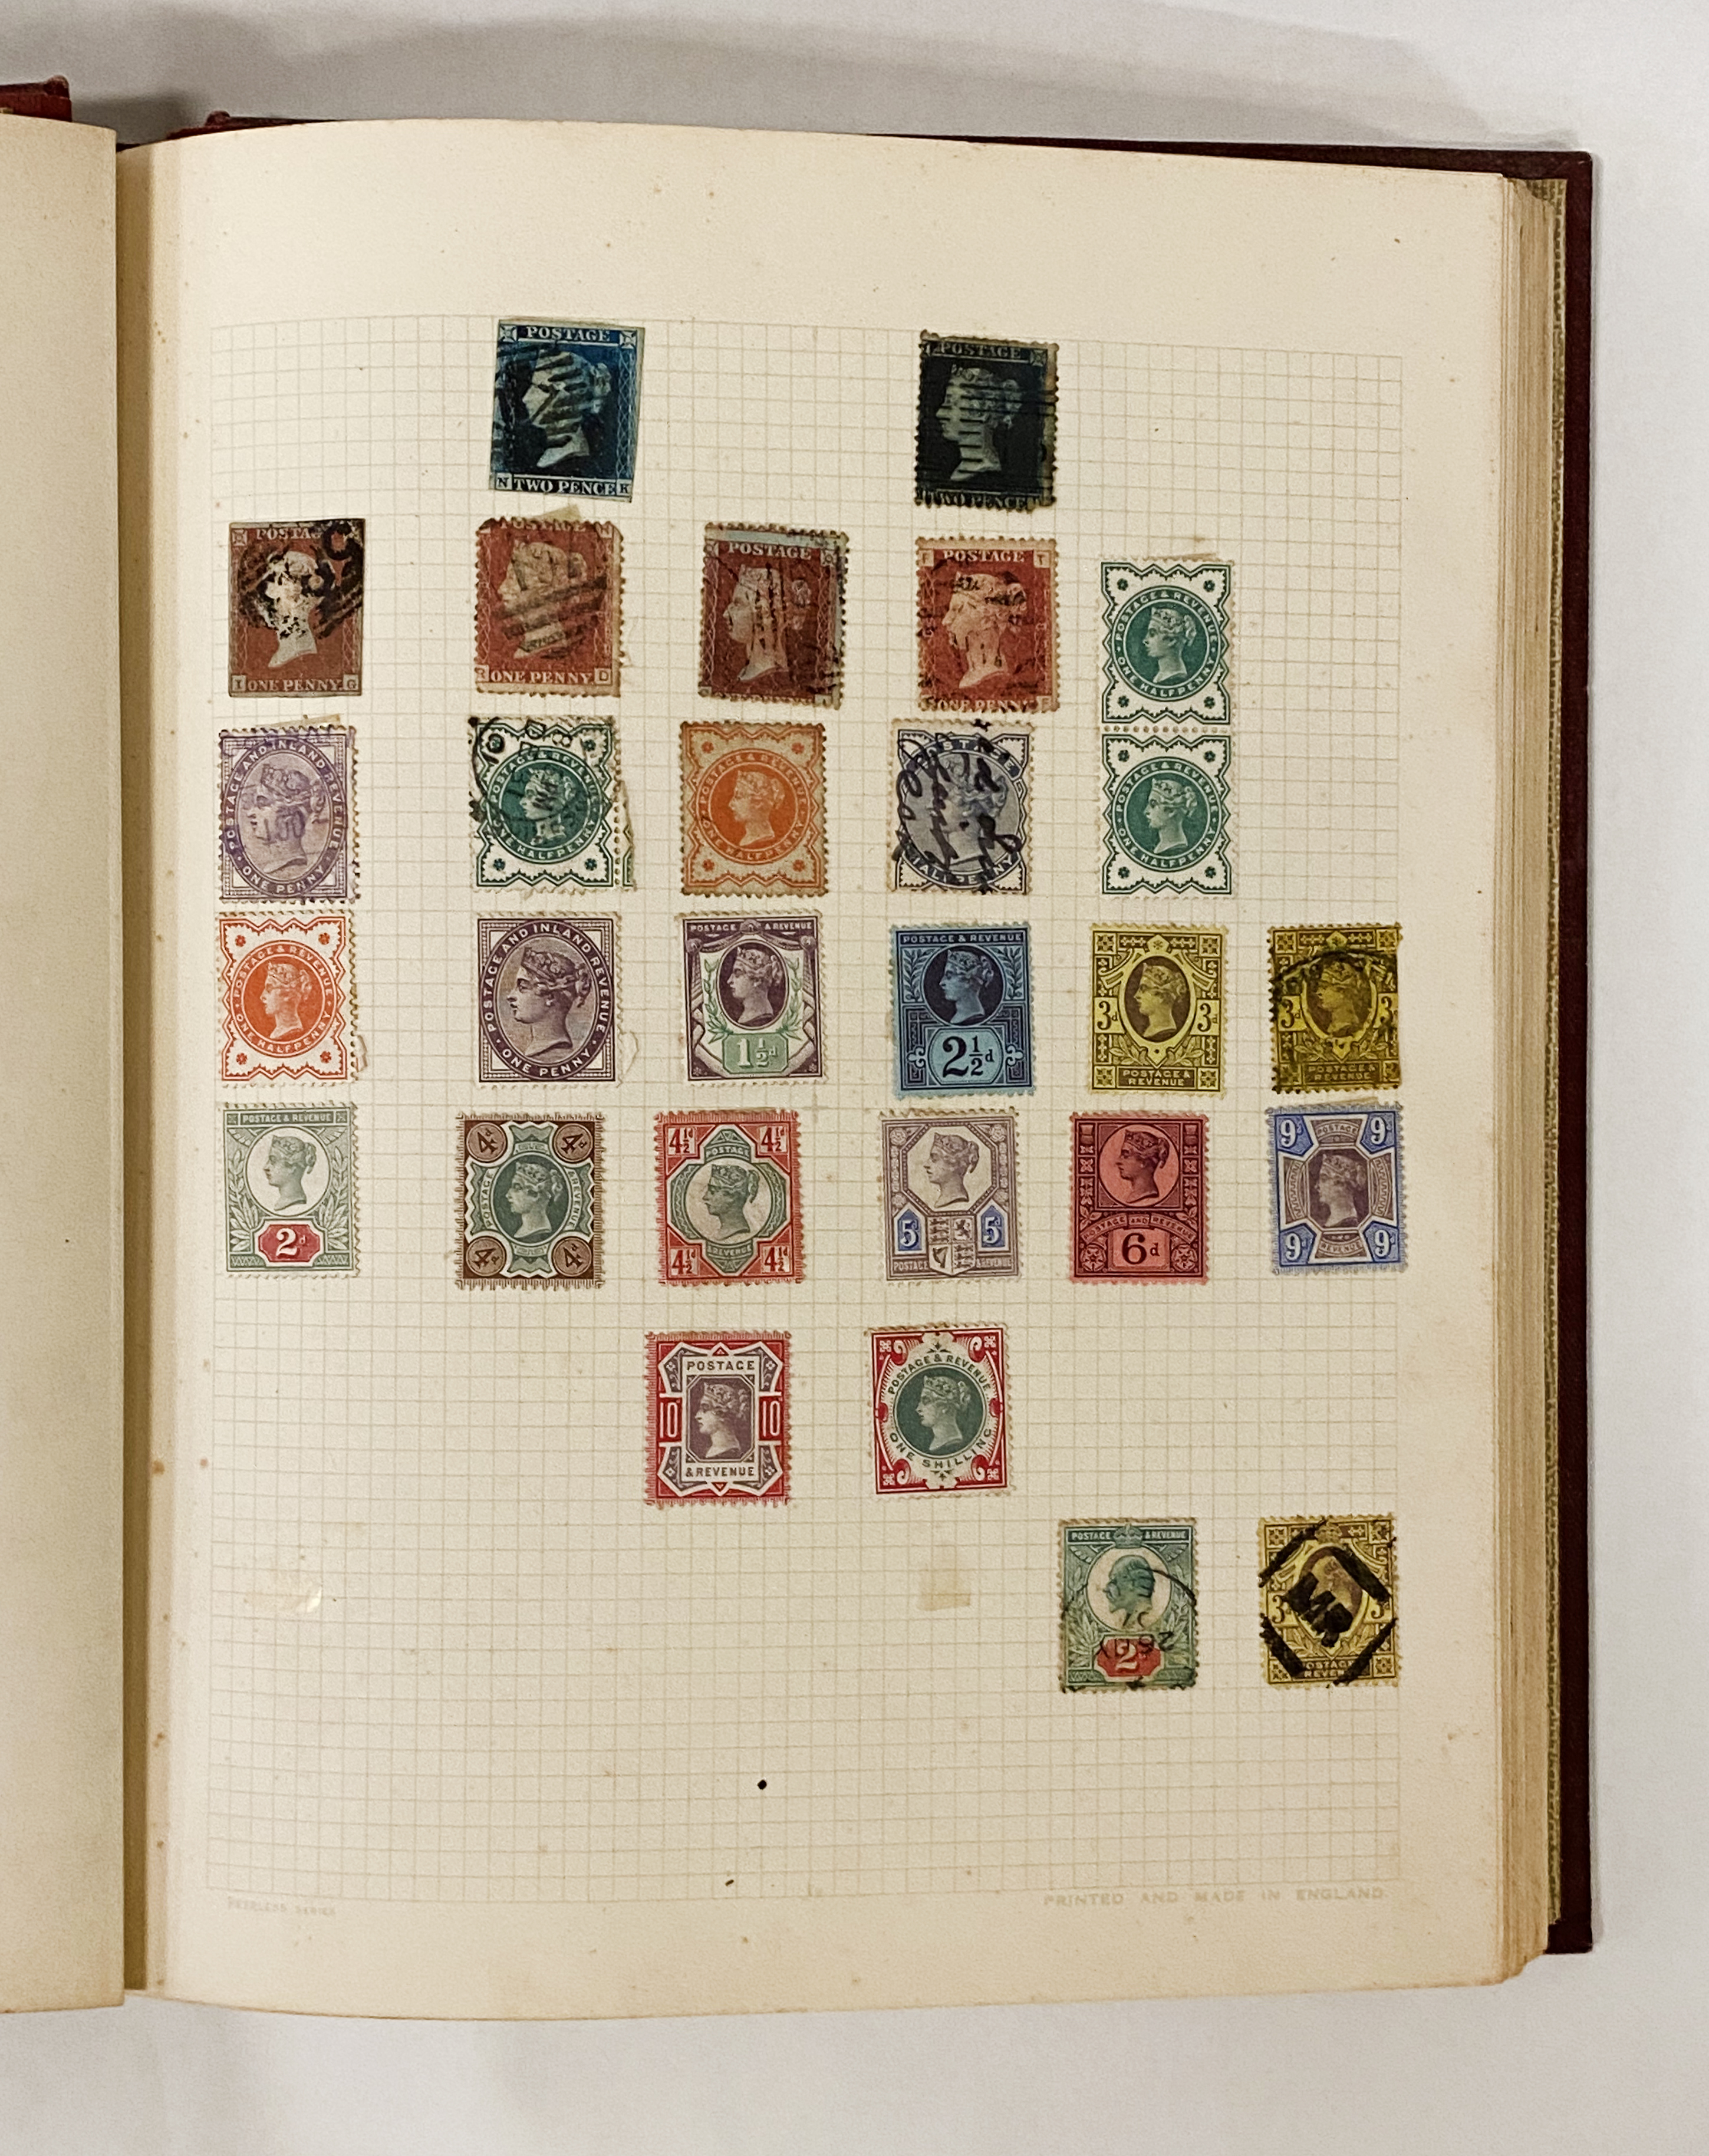 MINT QUEEN VICTORIA JUBILEE SET & SOME MINT EARLY COMMONWEALTH STAMPS IN ALBUM - HIGH VALUE